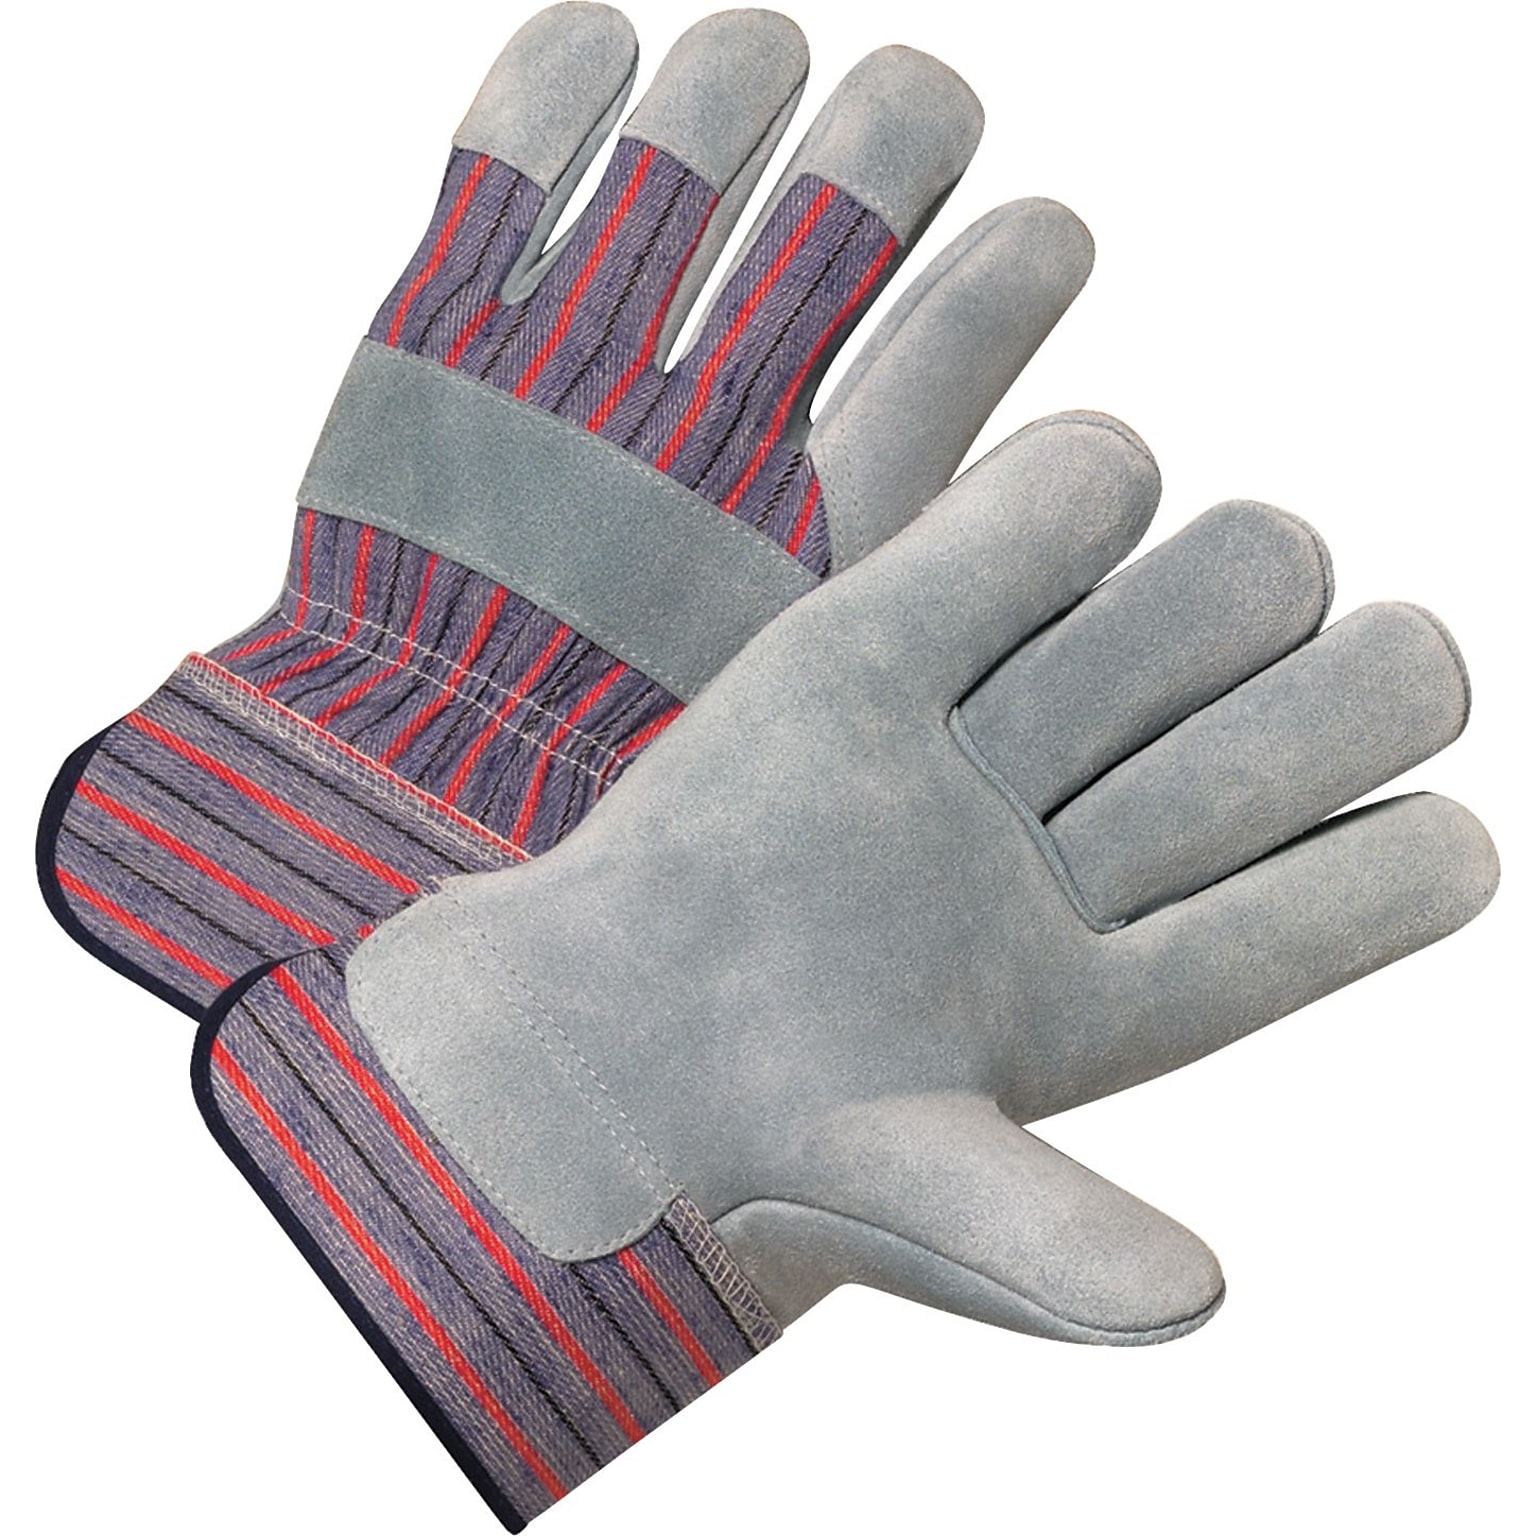 Anchor Brand Leather Palm Gloves, Split Cowhide, Rubberized Safety Cuff, L Size, Pearl Grey